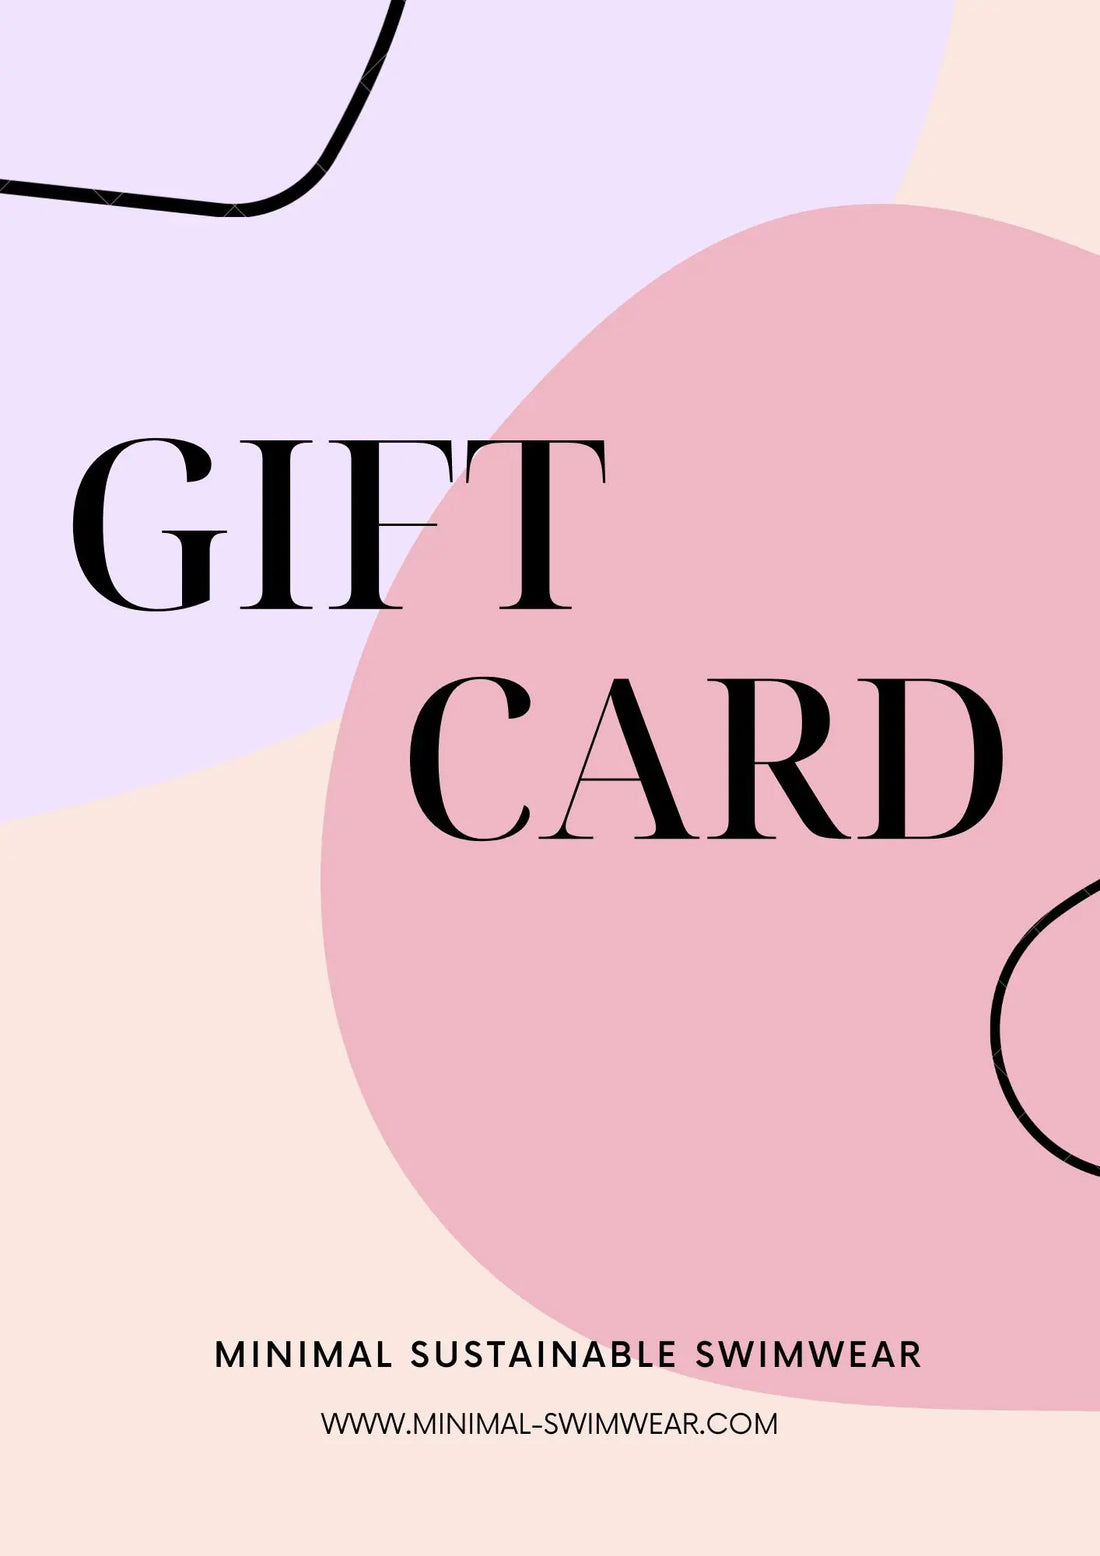 We have a gift card / voucher for you! #WELCOMETOTHECLUB Minimal Sustainable Swimwear